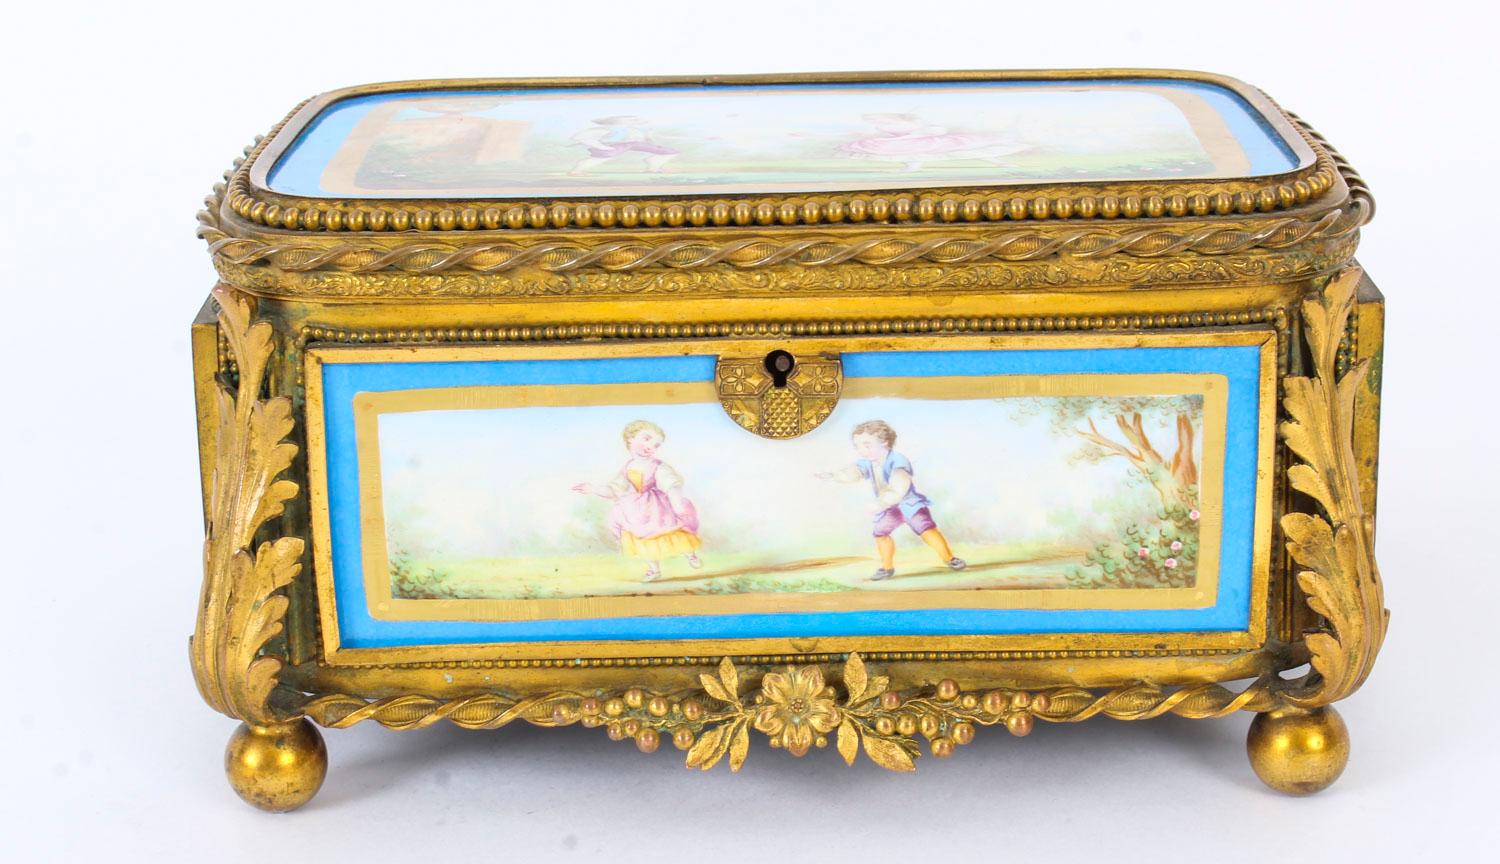 Antique French Sevres Porcelain and Ormolu Jewellery Casket 19th Century  In Good Condition For Sale In London, GB